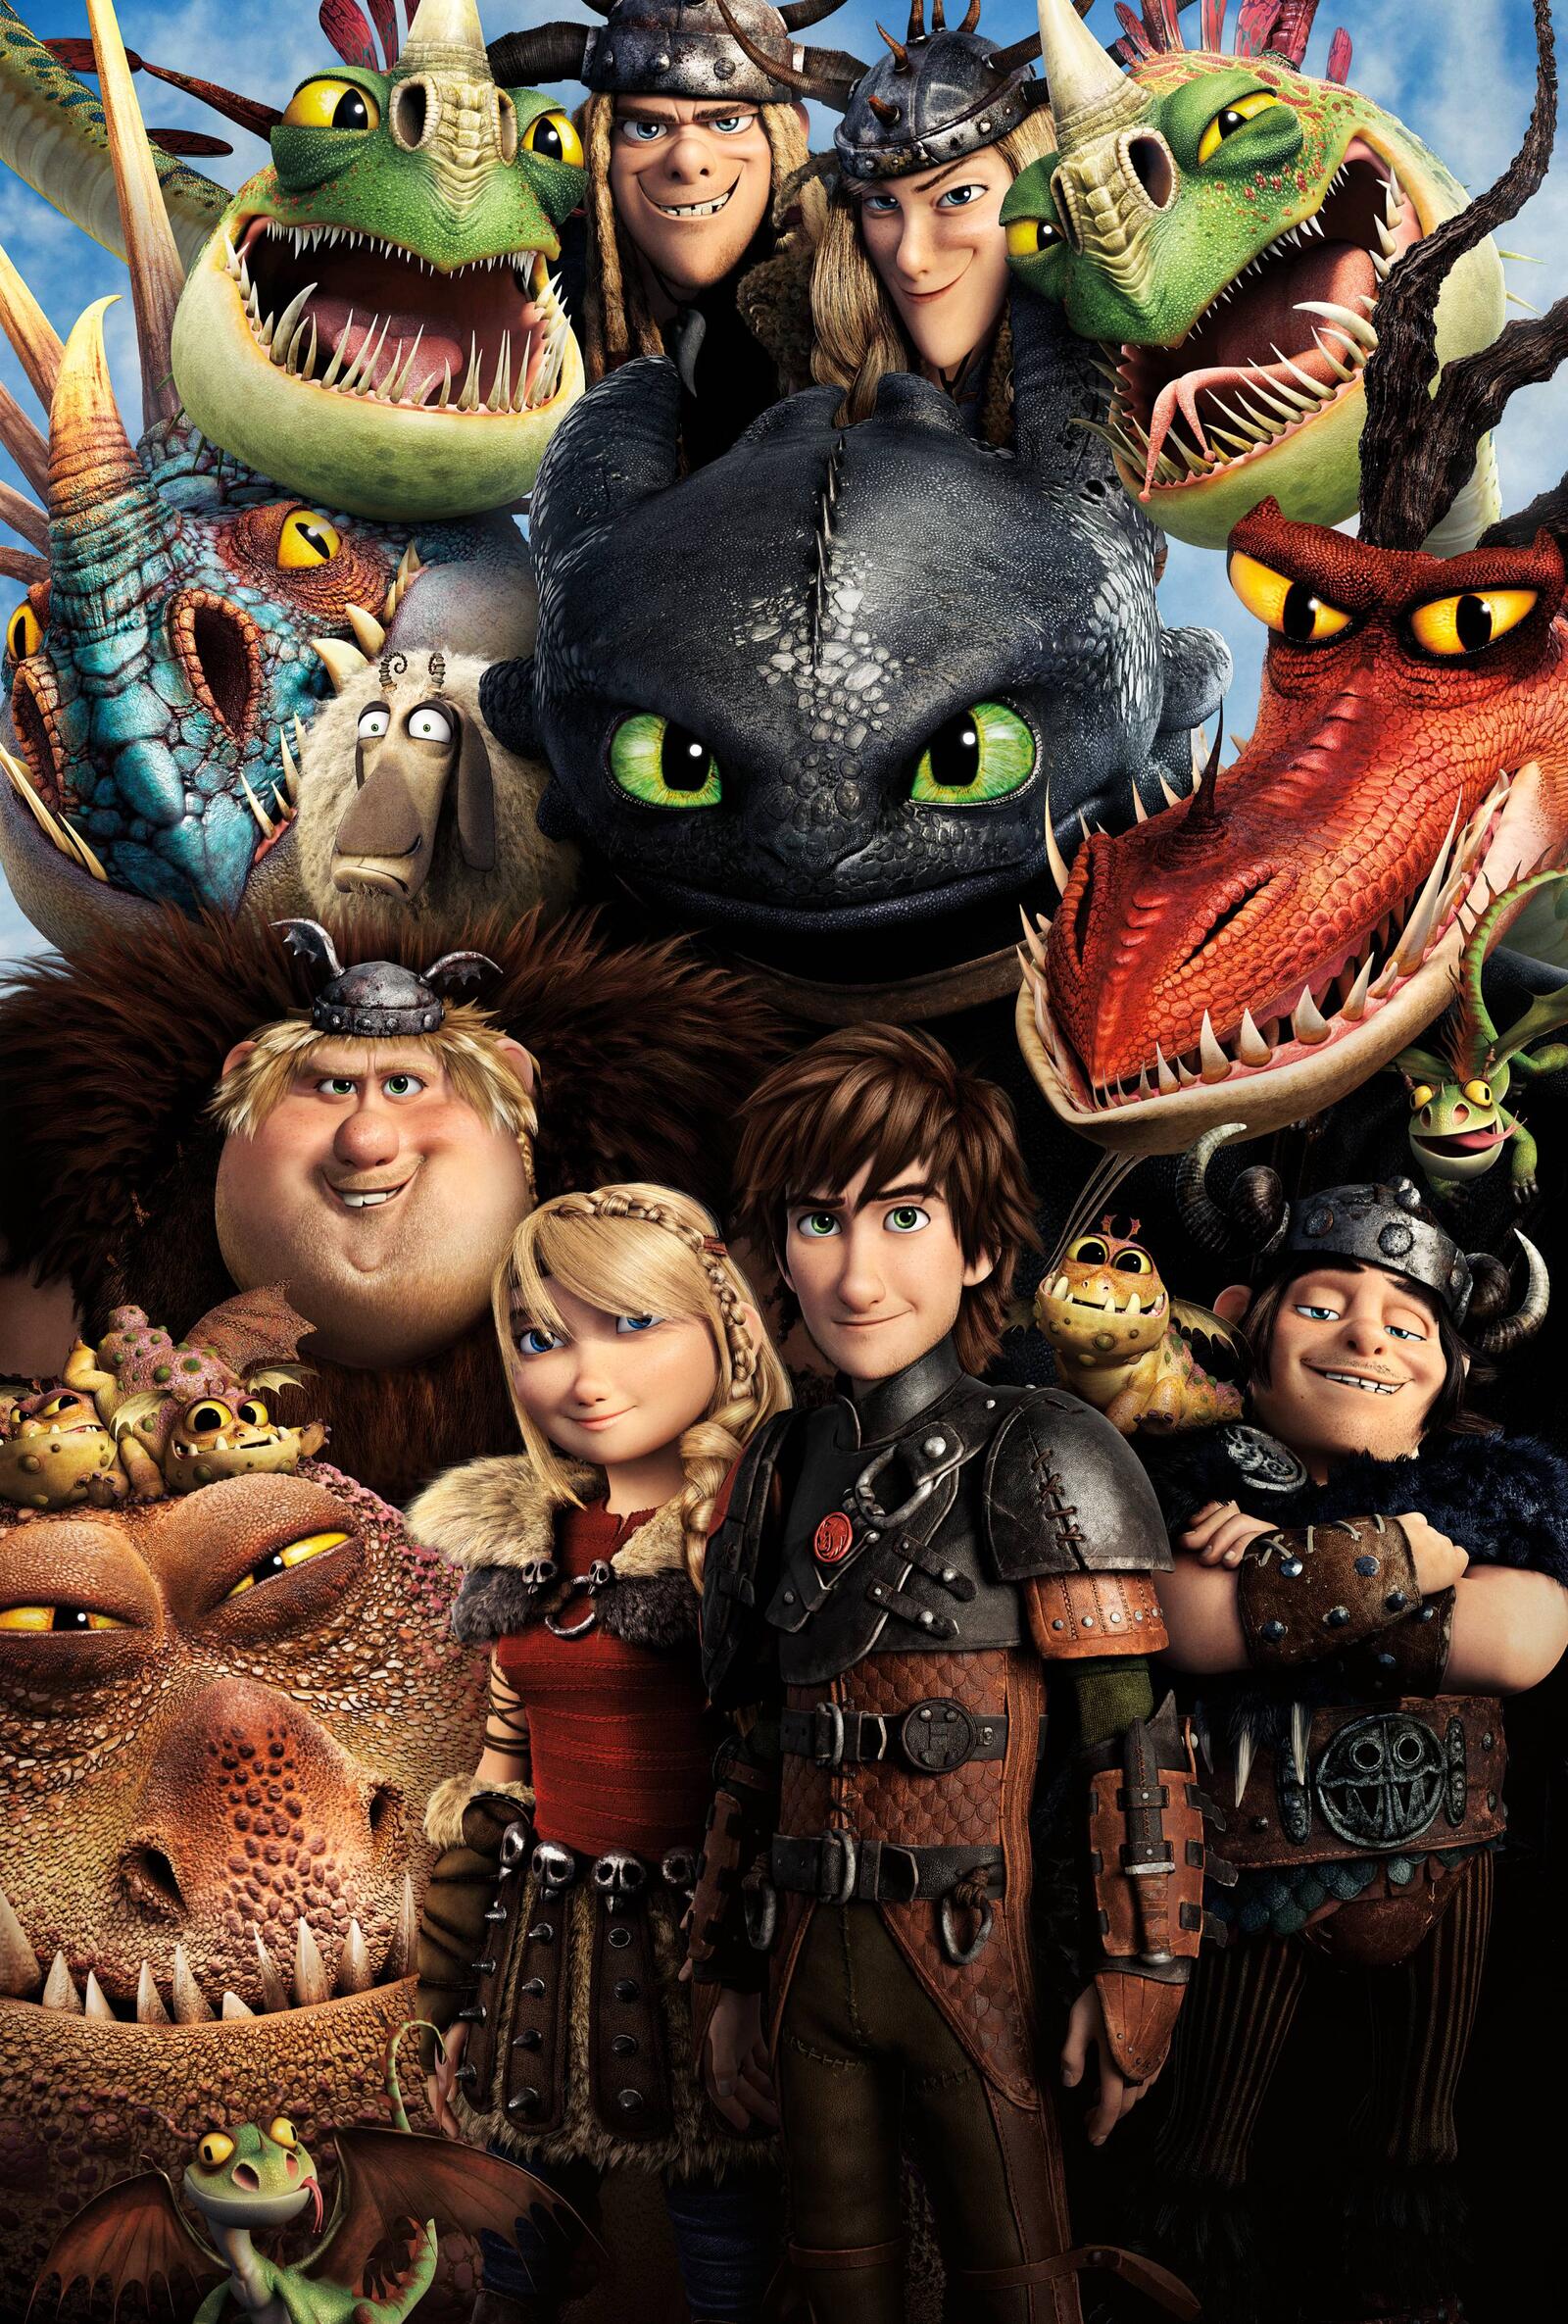 Wallpapers How to Train Your Dragon Cartoon Fantasy on the desktop